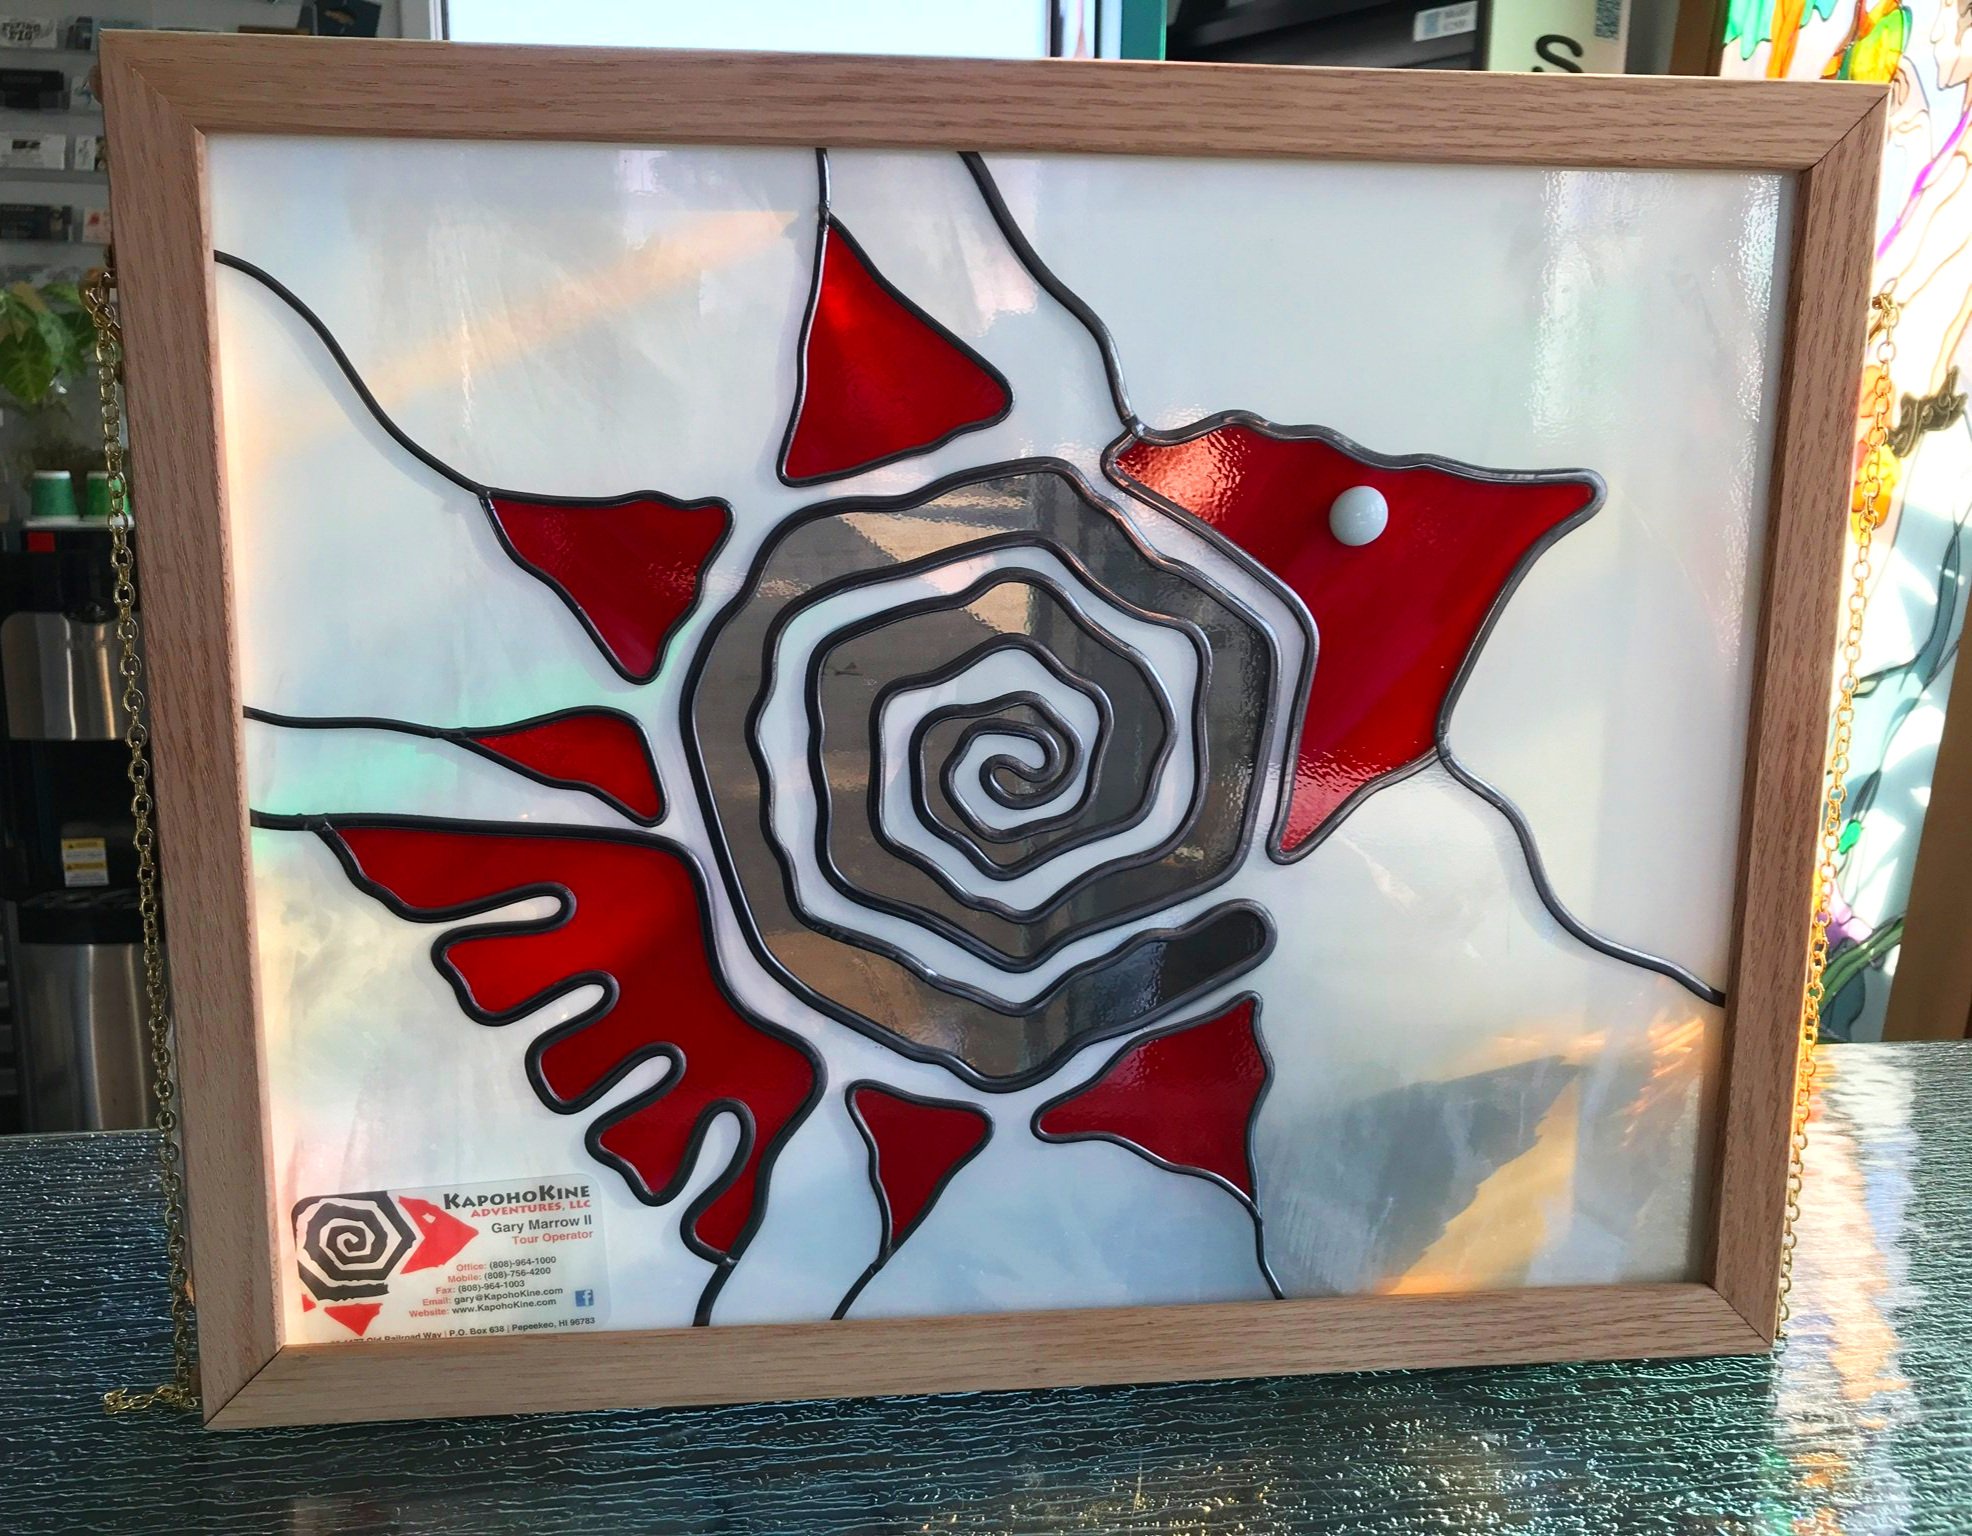  Company stylized fish logo on a square piece of tempered glass 